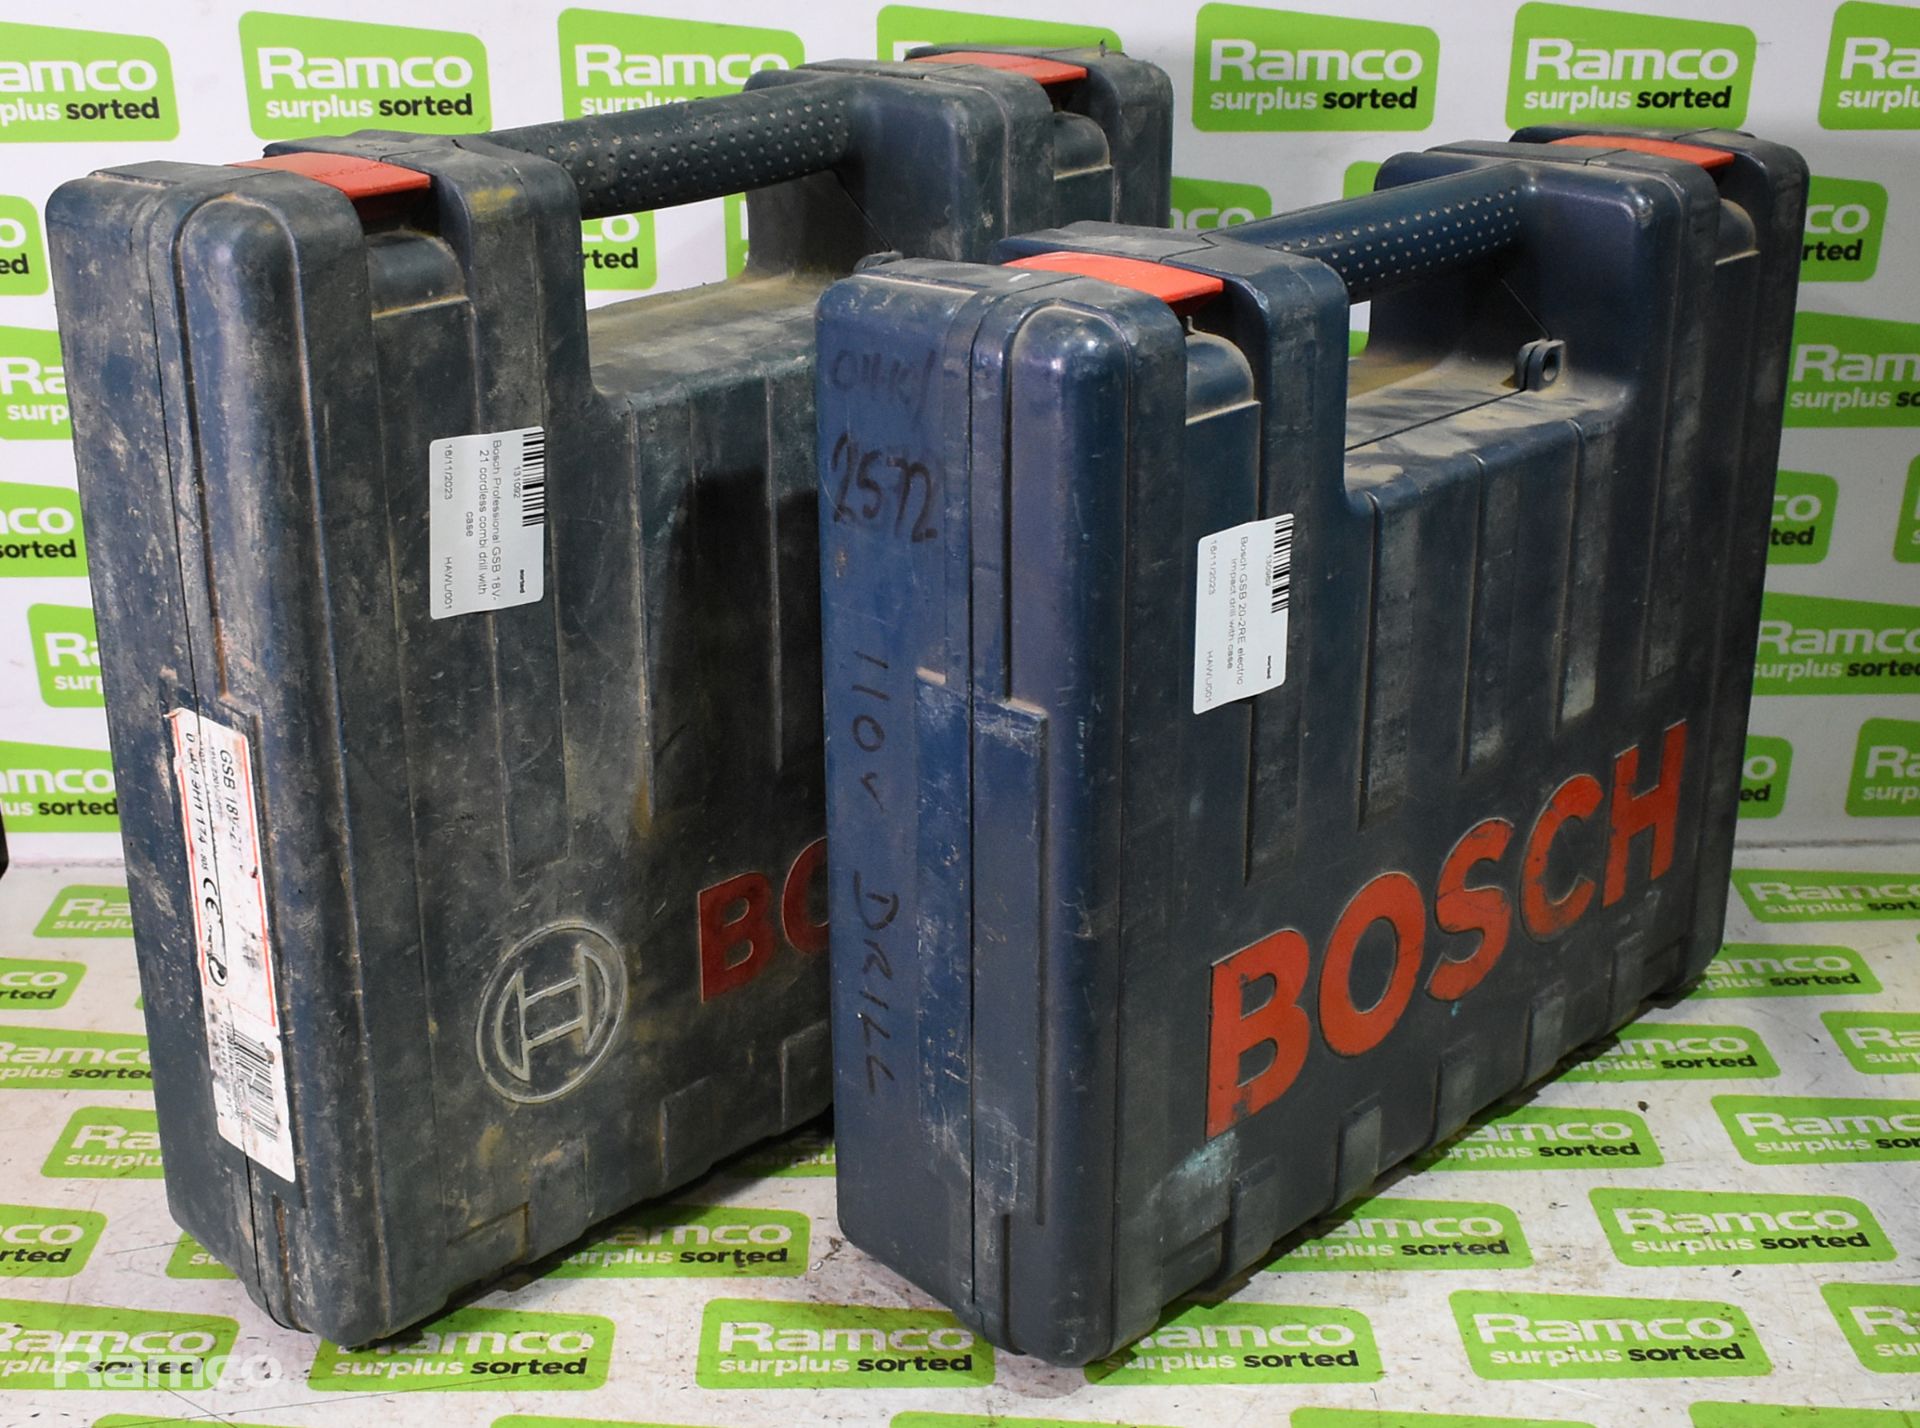 Bosch GSB 20-2RE electric impact drill with case, Bosch Professional GSB 18V-21 cordless combi drill - Image 7 of 7